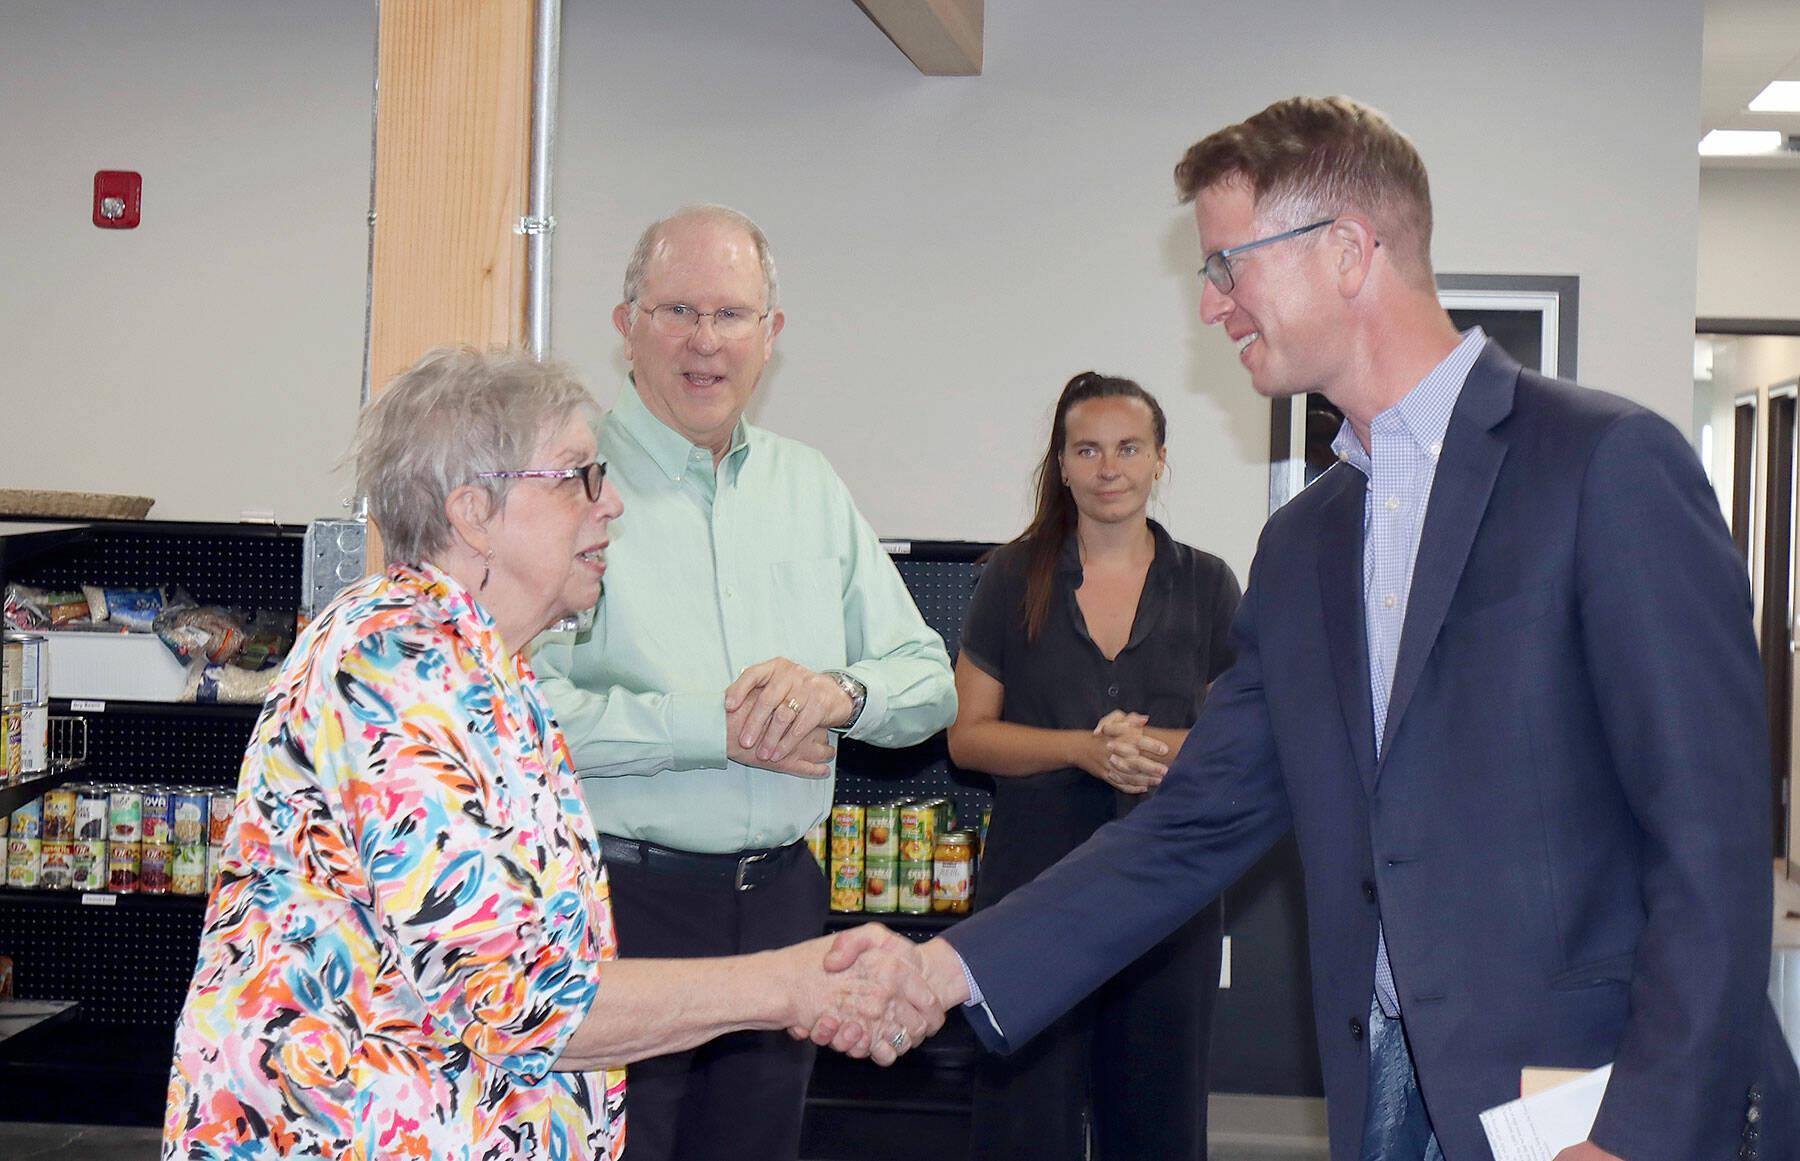 U.S. Rep. Derek Kilmer shakes hands with Diana Walter-Lopez, Port Angeles Food Bank board secretary. Behind her is Kelly Fisher, board treasurer. In the background is Alexi Nelson of the Food Bank staff. (Dave Logan/for Peninsula Daily News)